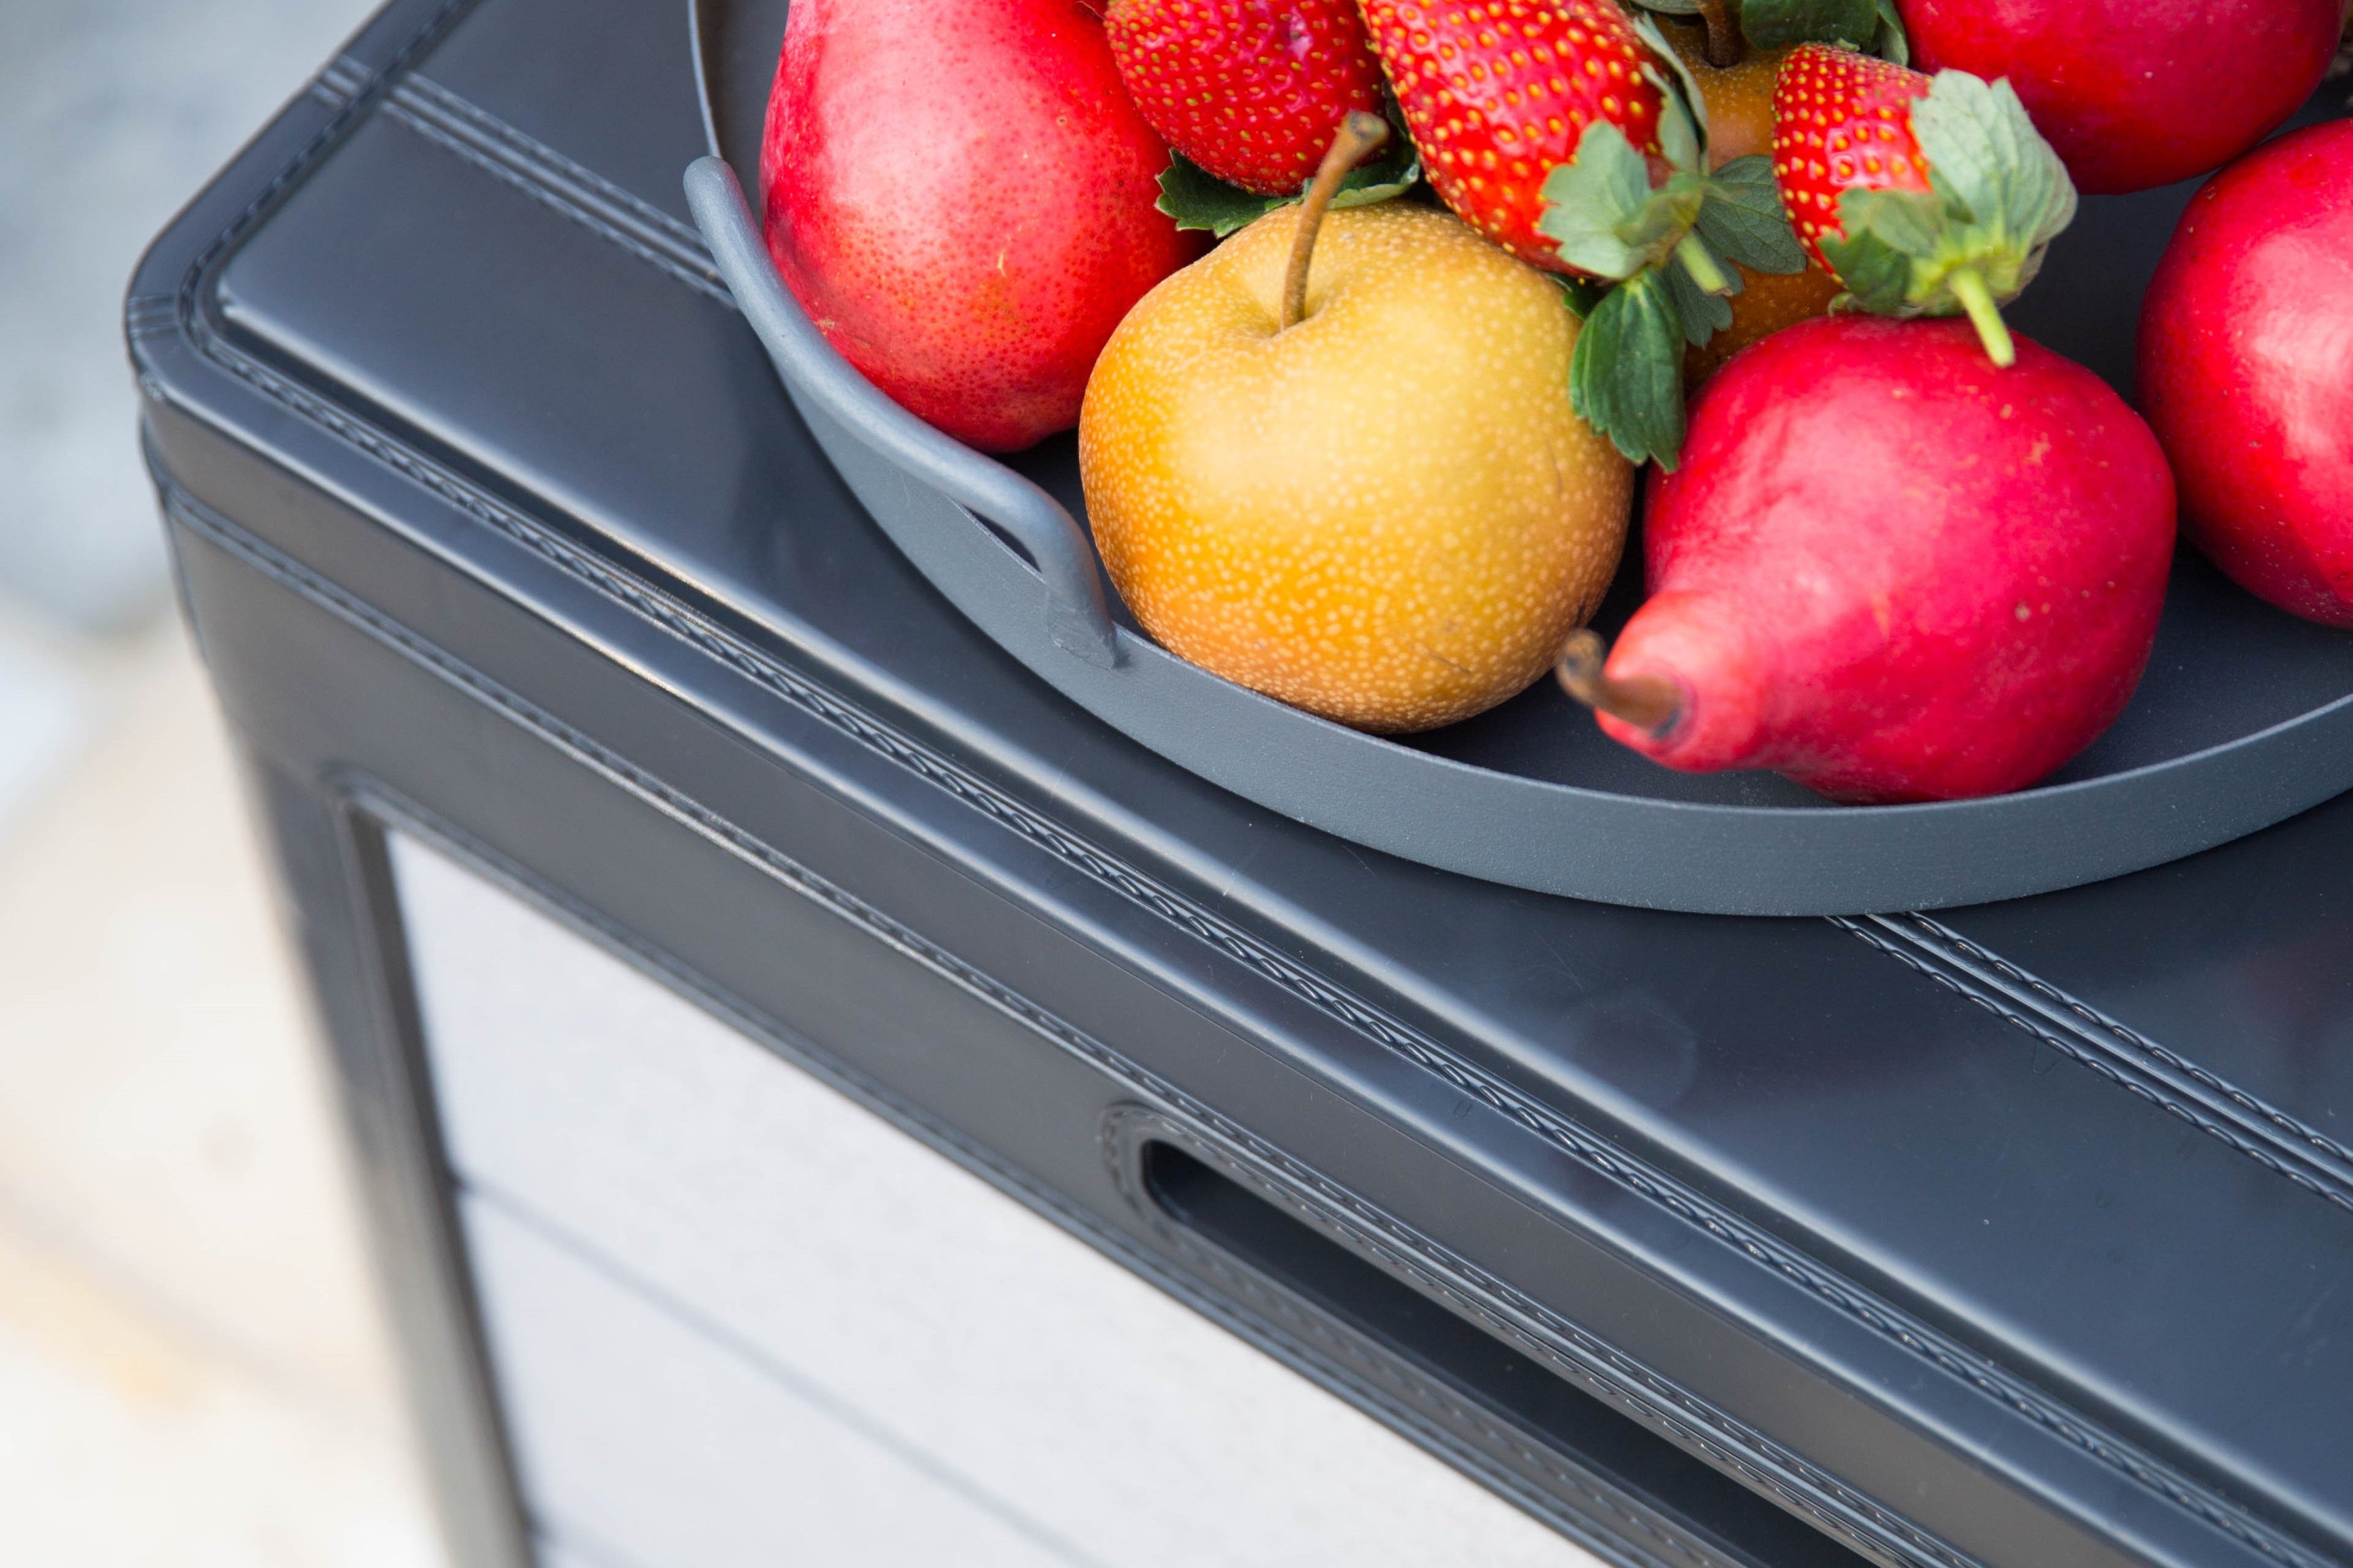 Storage box being used as a table for fruit bowl